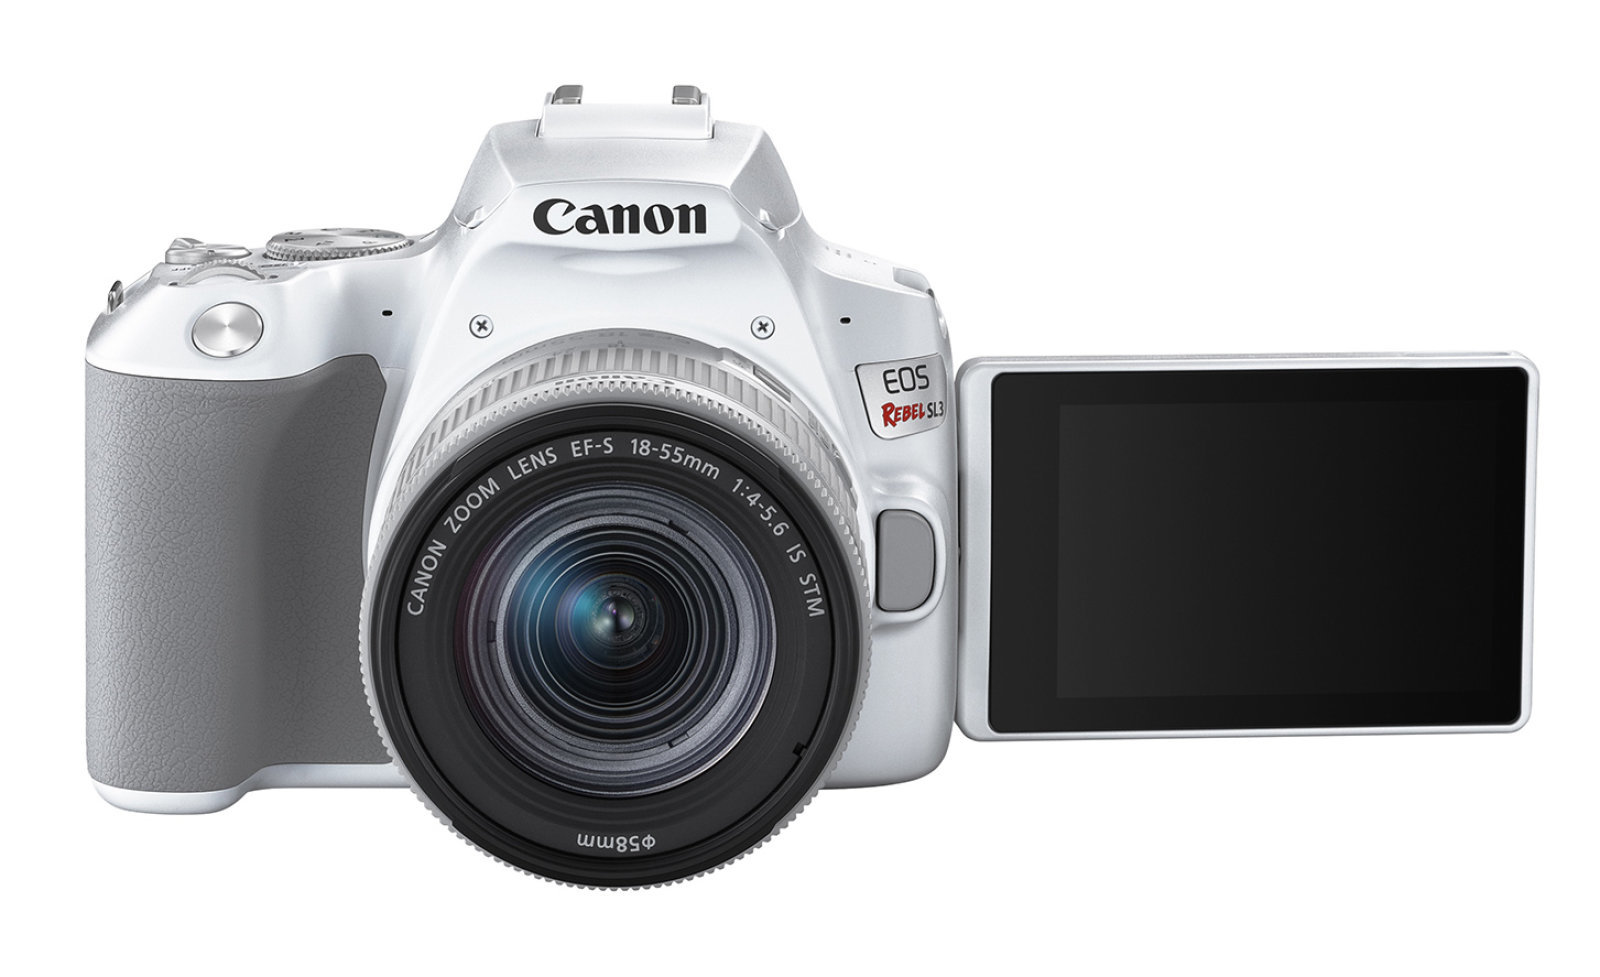 With The EOS Rebel SL3 Canon keeps on shrinking DSLRs